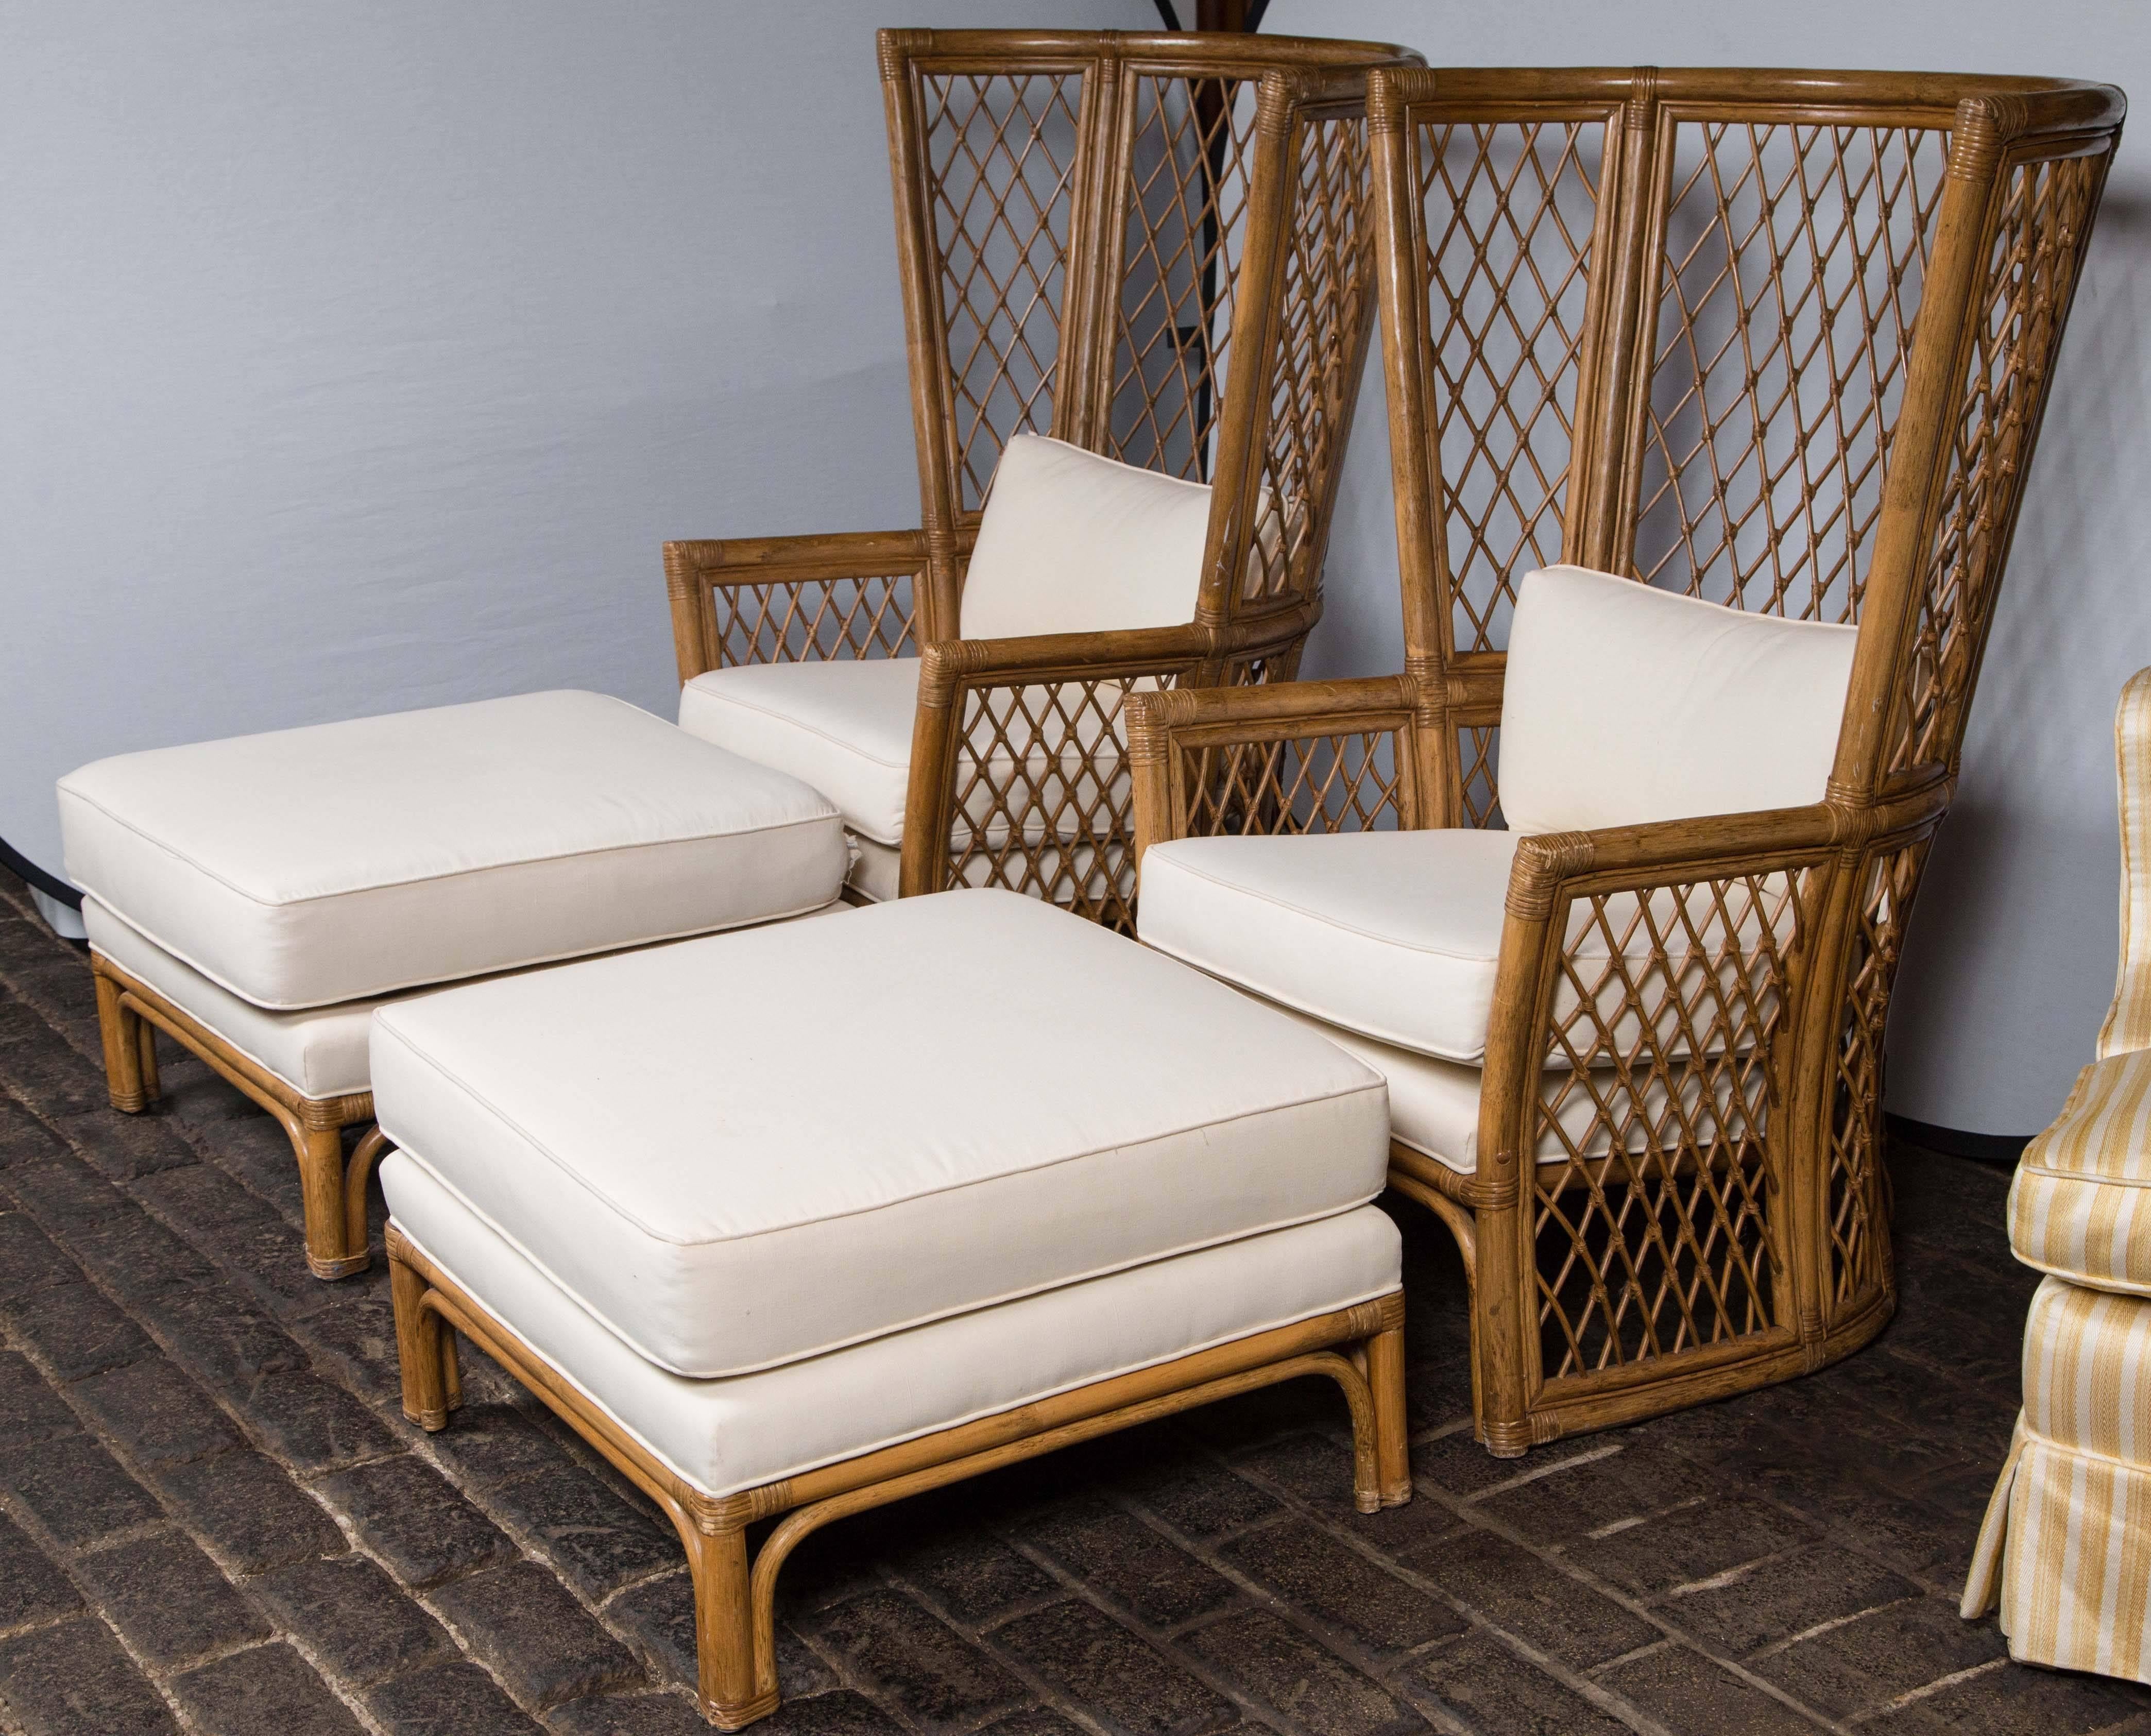 Pair of stunning highback lattice bamboo armchairs with matching ottomans. Seat height 18", arm height 23.5".
Ottomans: 26.5" sq, 16" H.
Fabric is new.
Price includes all four pieces.